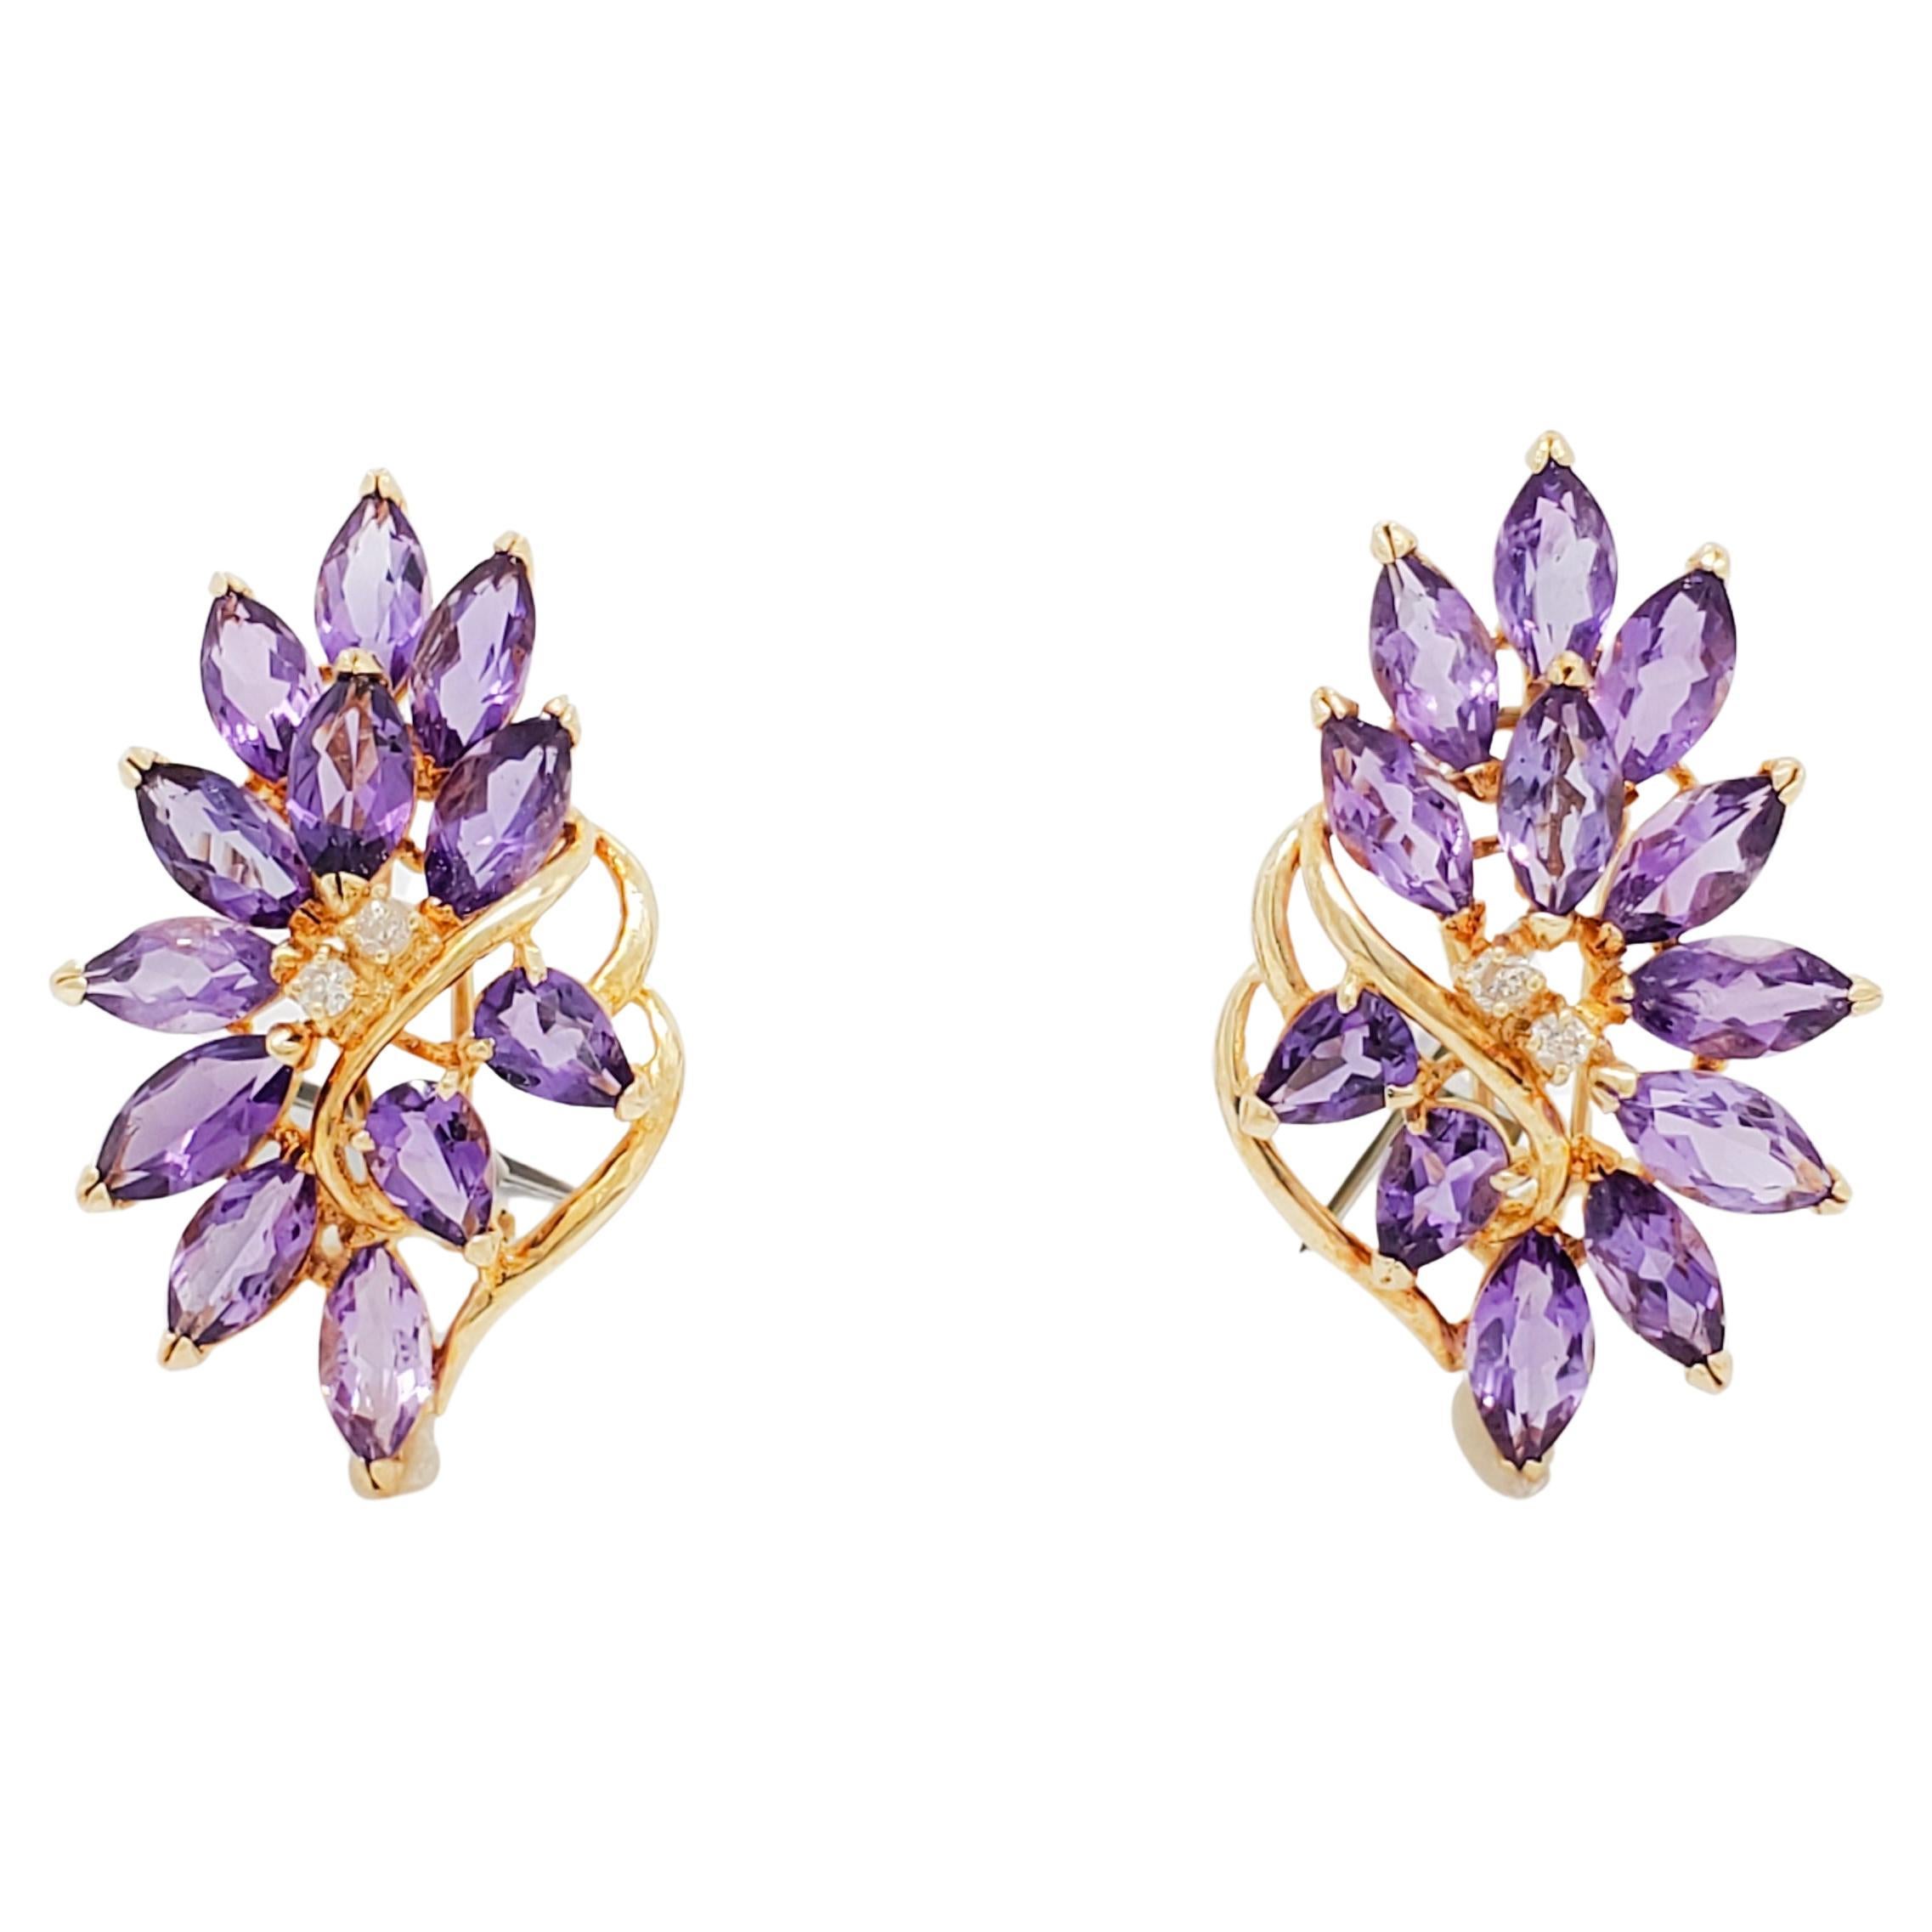 Amethyst and Diamond Earring Clips in 14k Yellow Gold